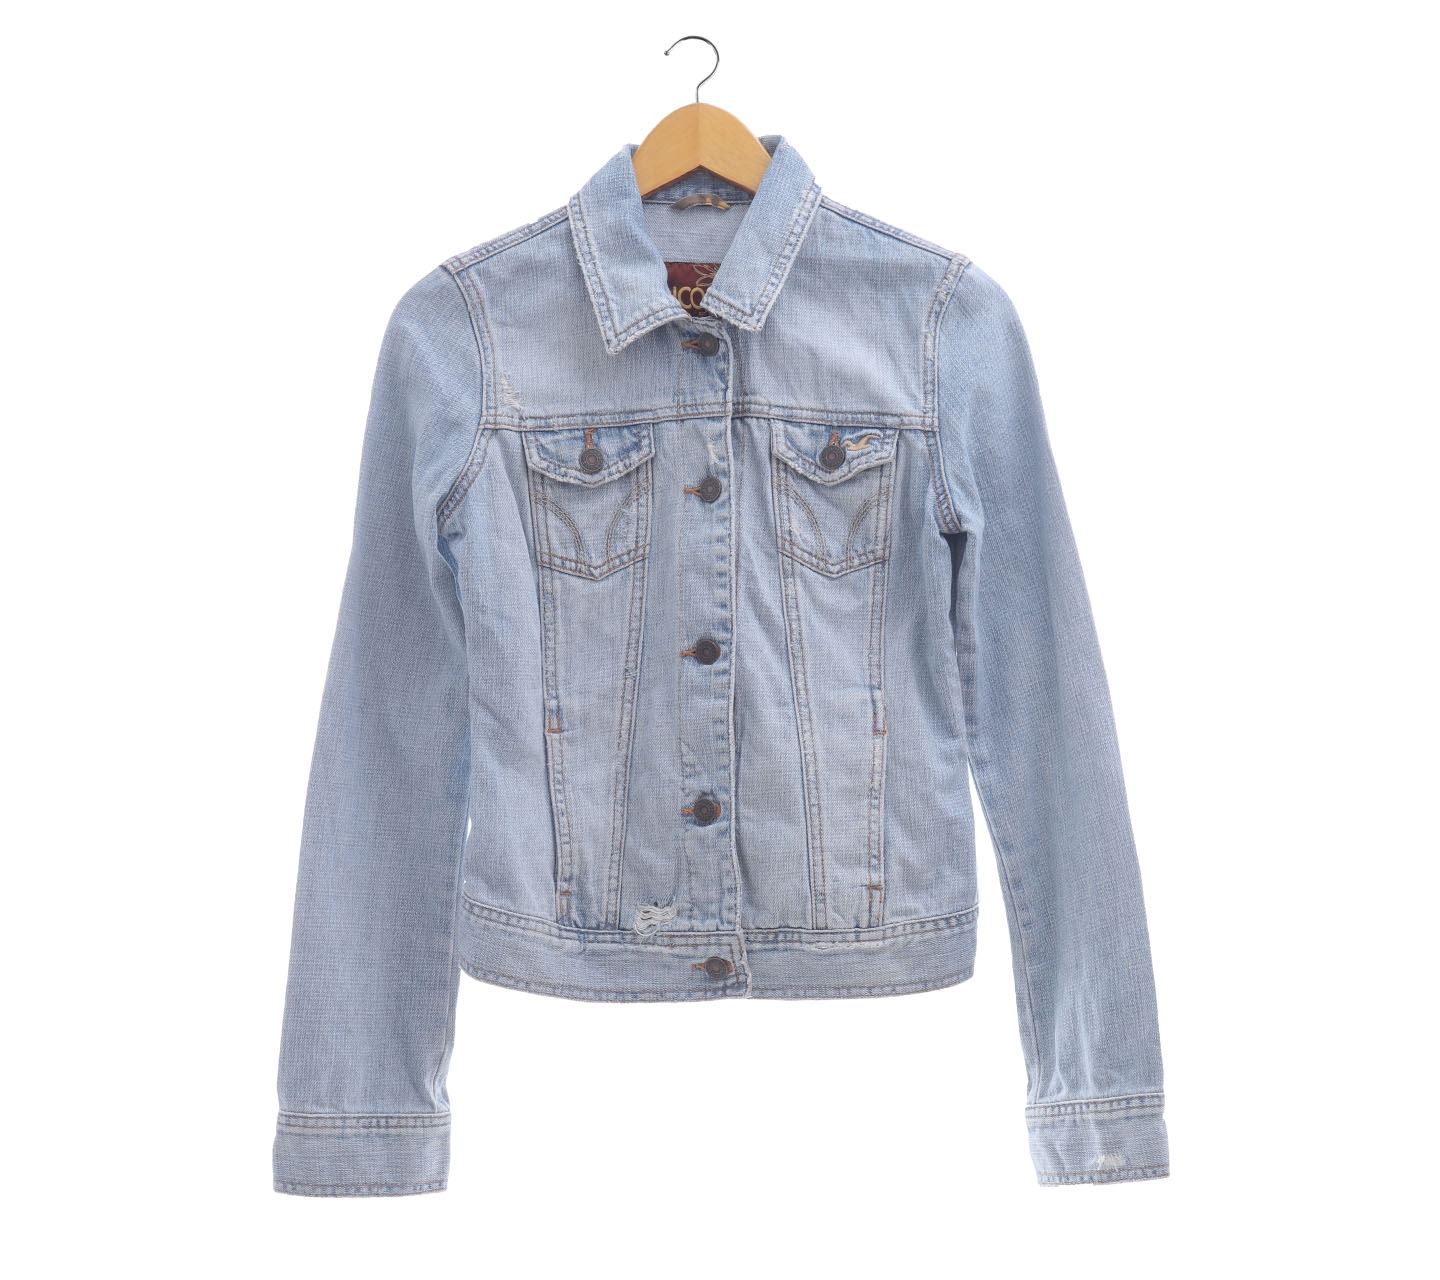 Surf Company Light Blue Whased Repped Jacket